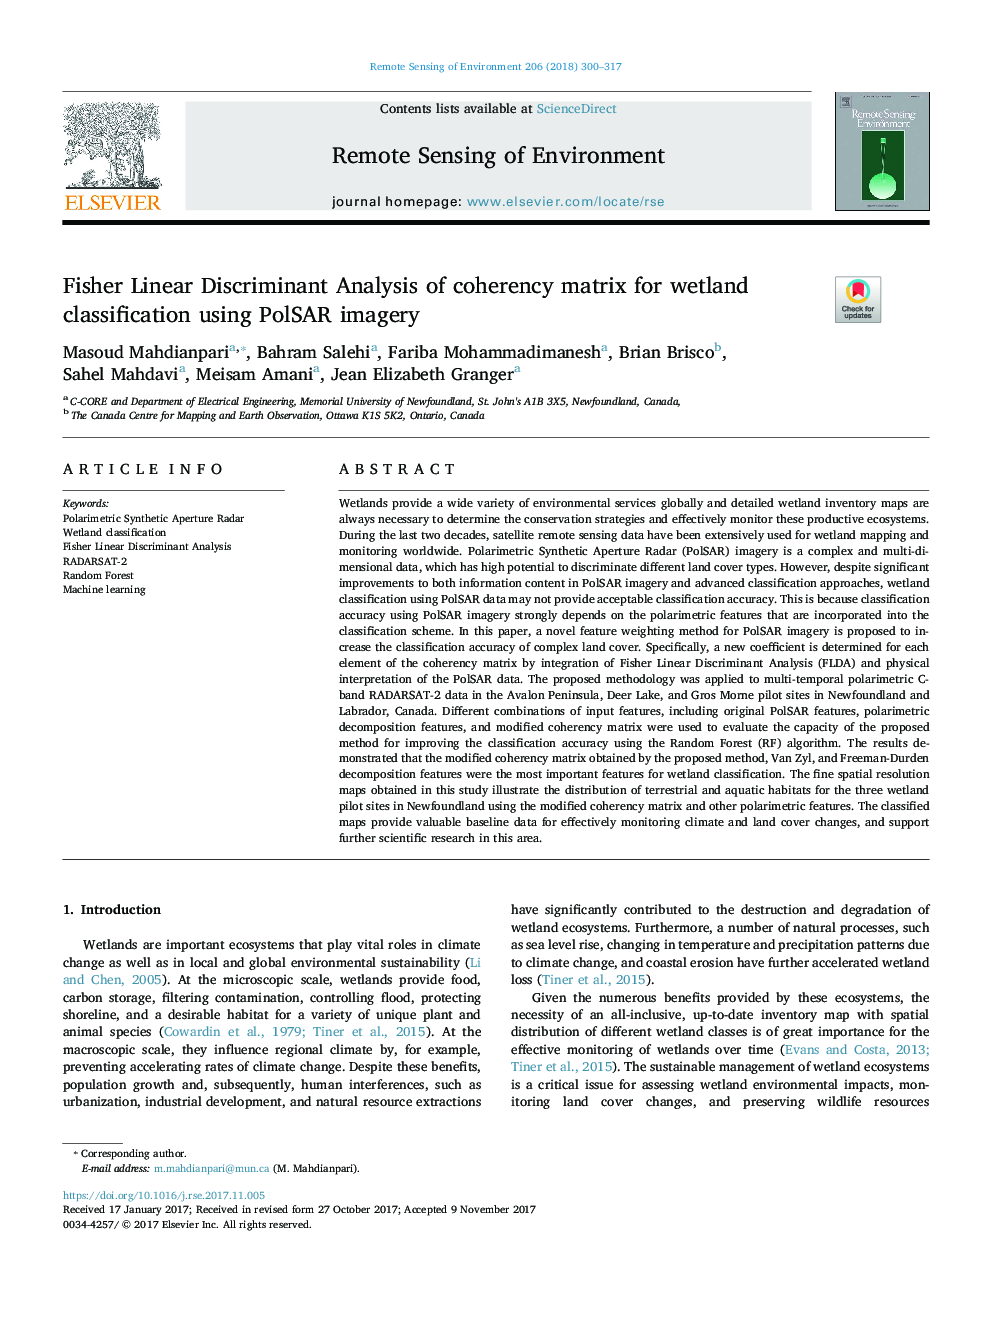 Fisher Linear Discriminant Analysis of coherency matrix for wetland classification using PolSAR imagery